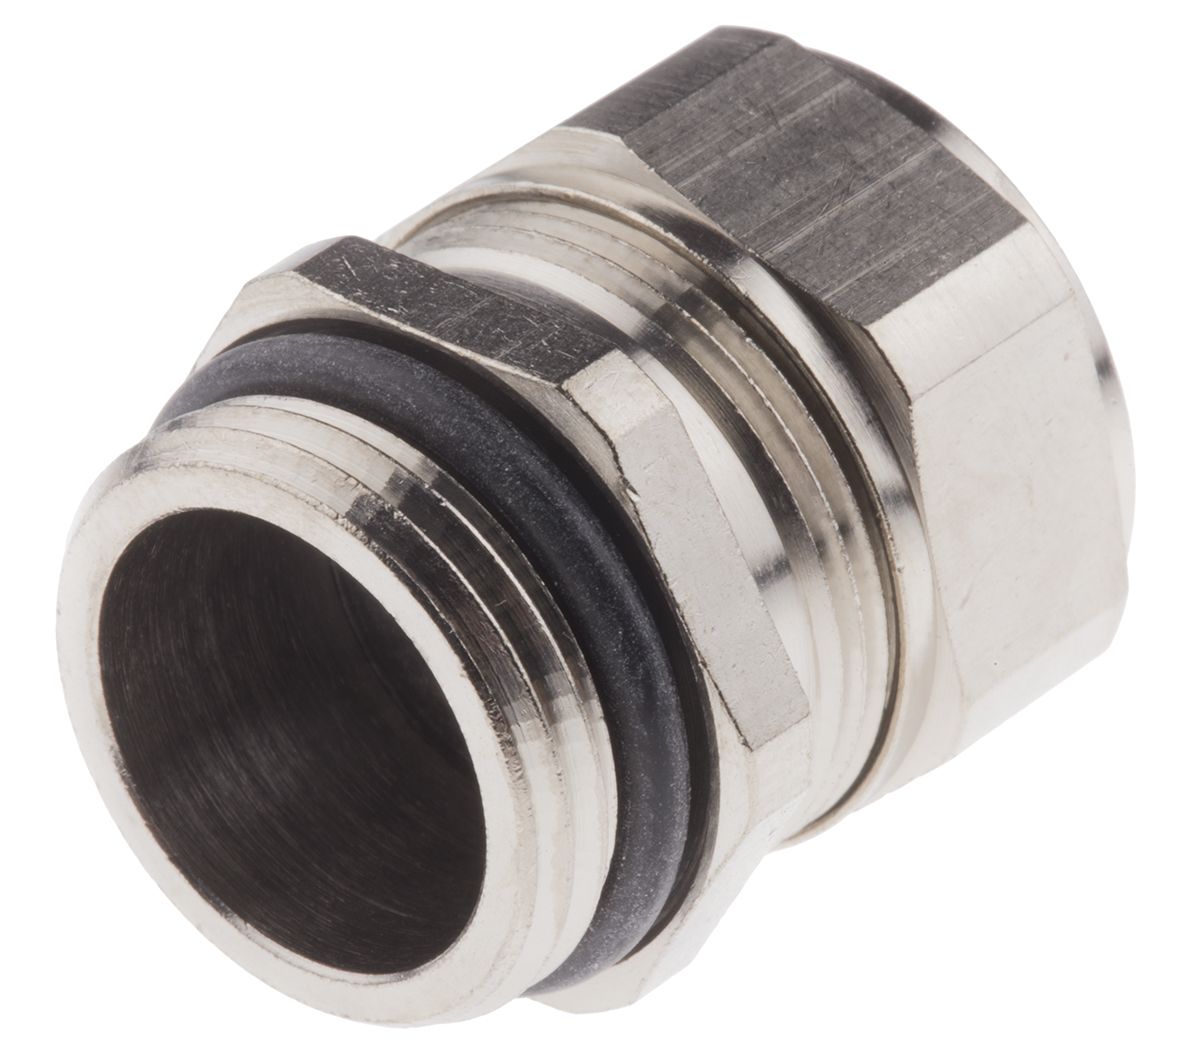 SES Sterling A1 Series Metallic Nickel Plated Brass Cable Gland, PG11 Thread, 5.5mm Min, 12mm Max, IP68